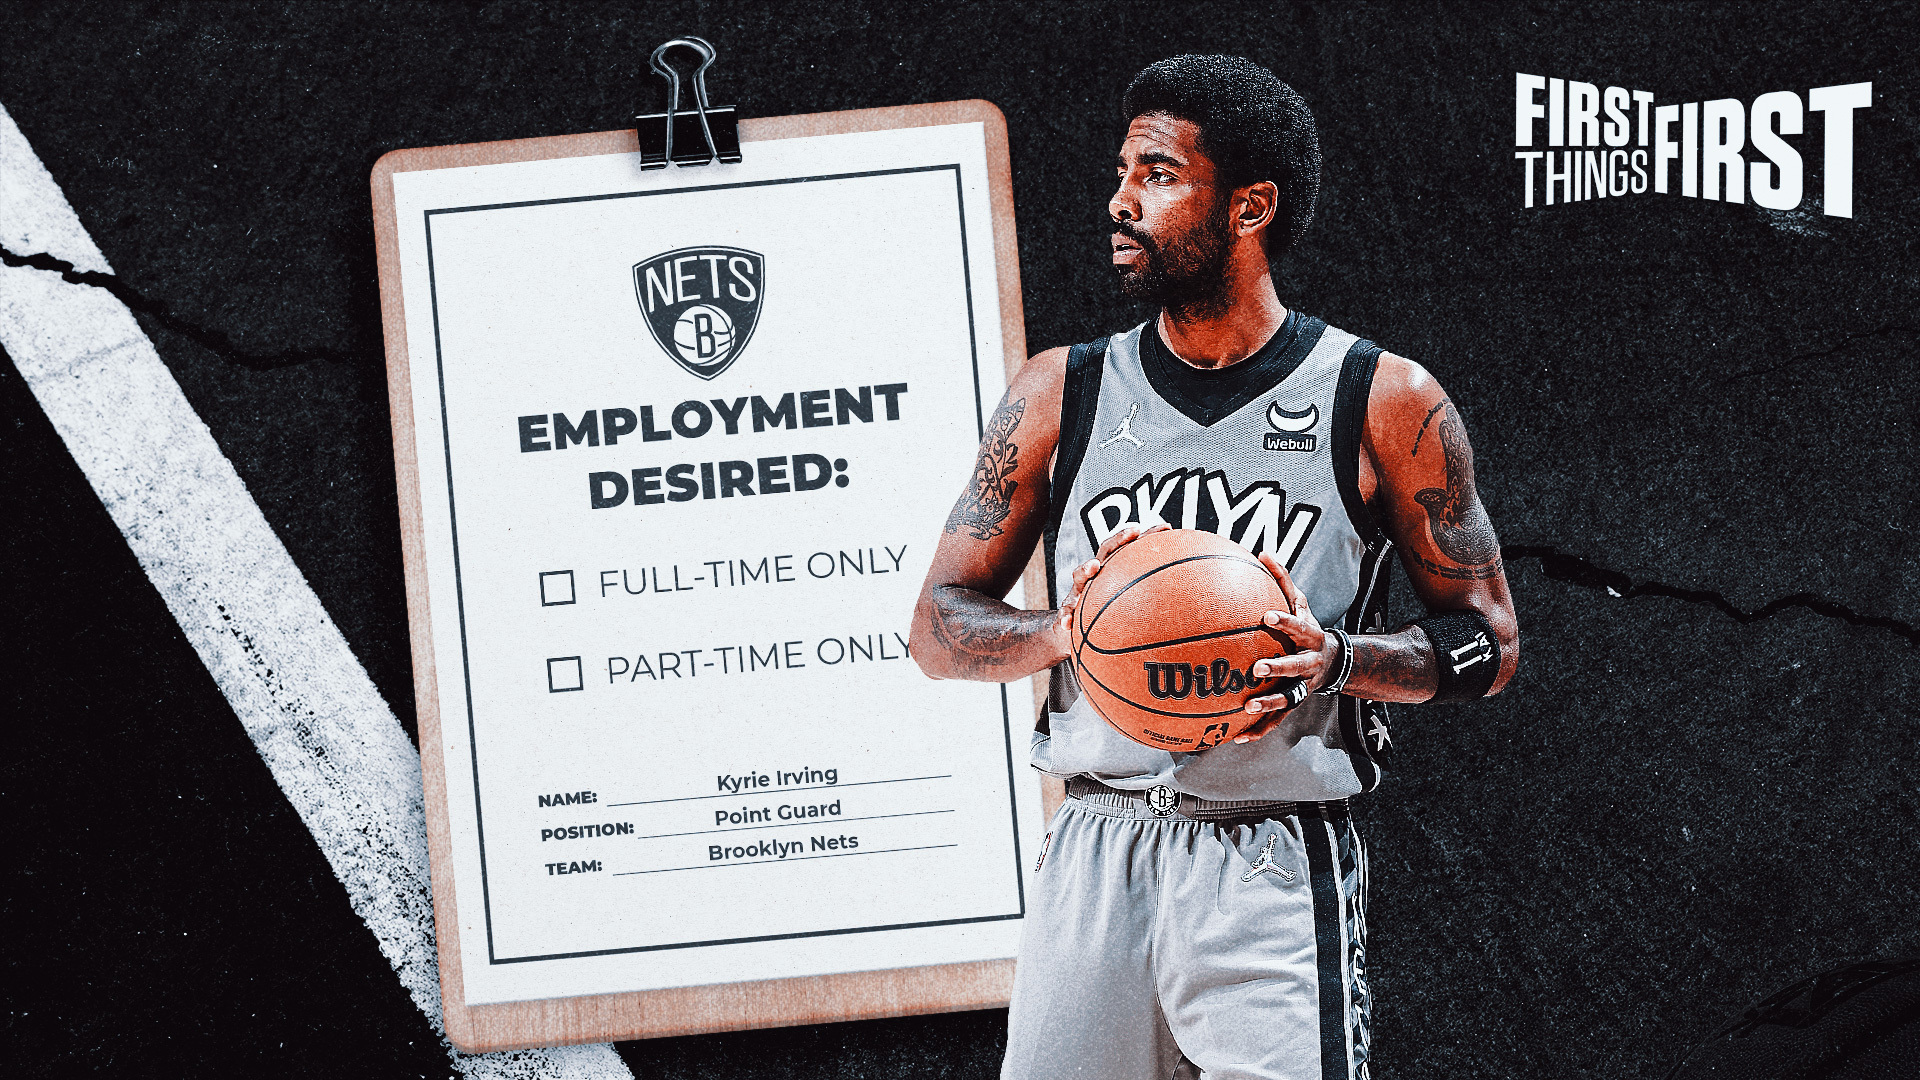 Kyrie Irving remains Nets' dominant topic following domination of Bulls